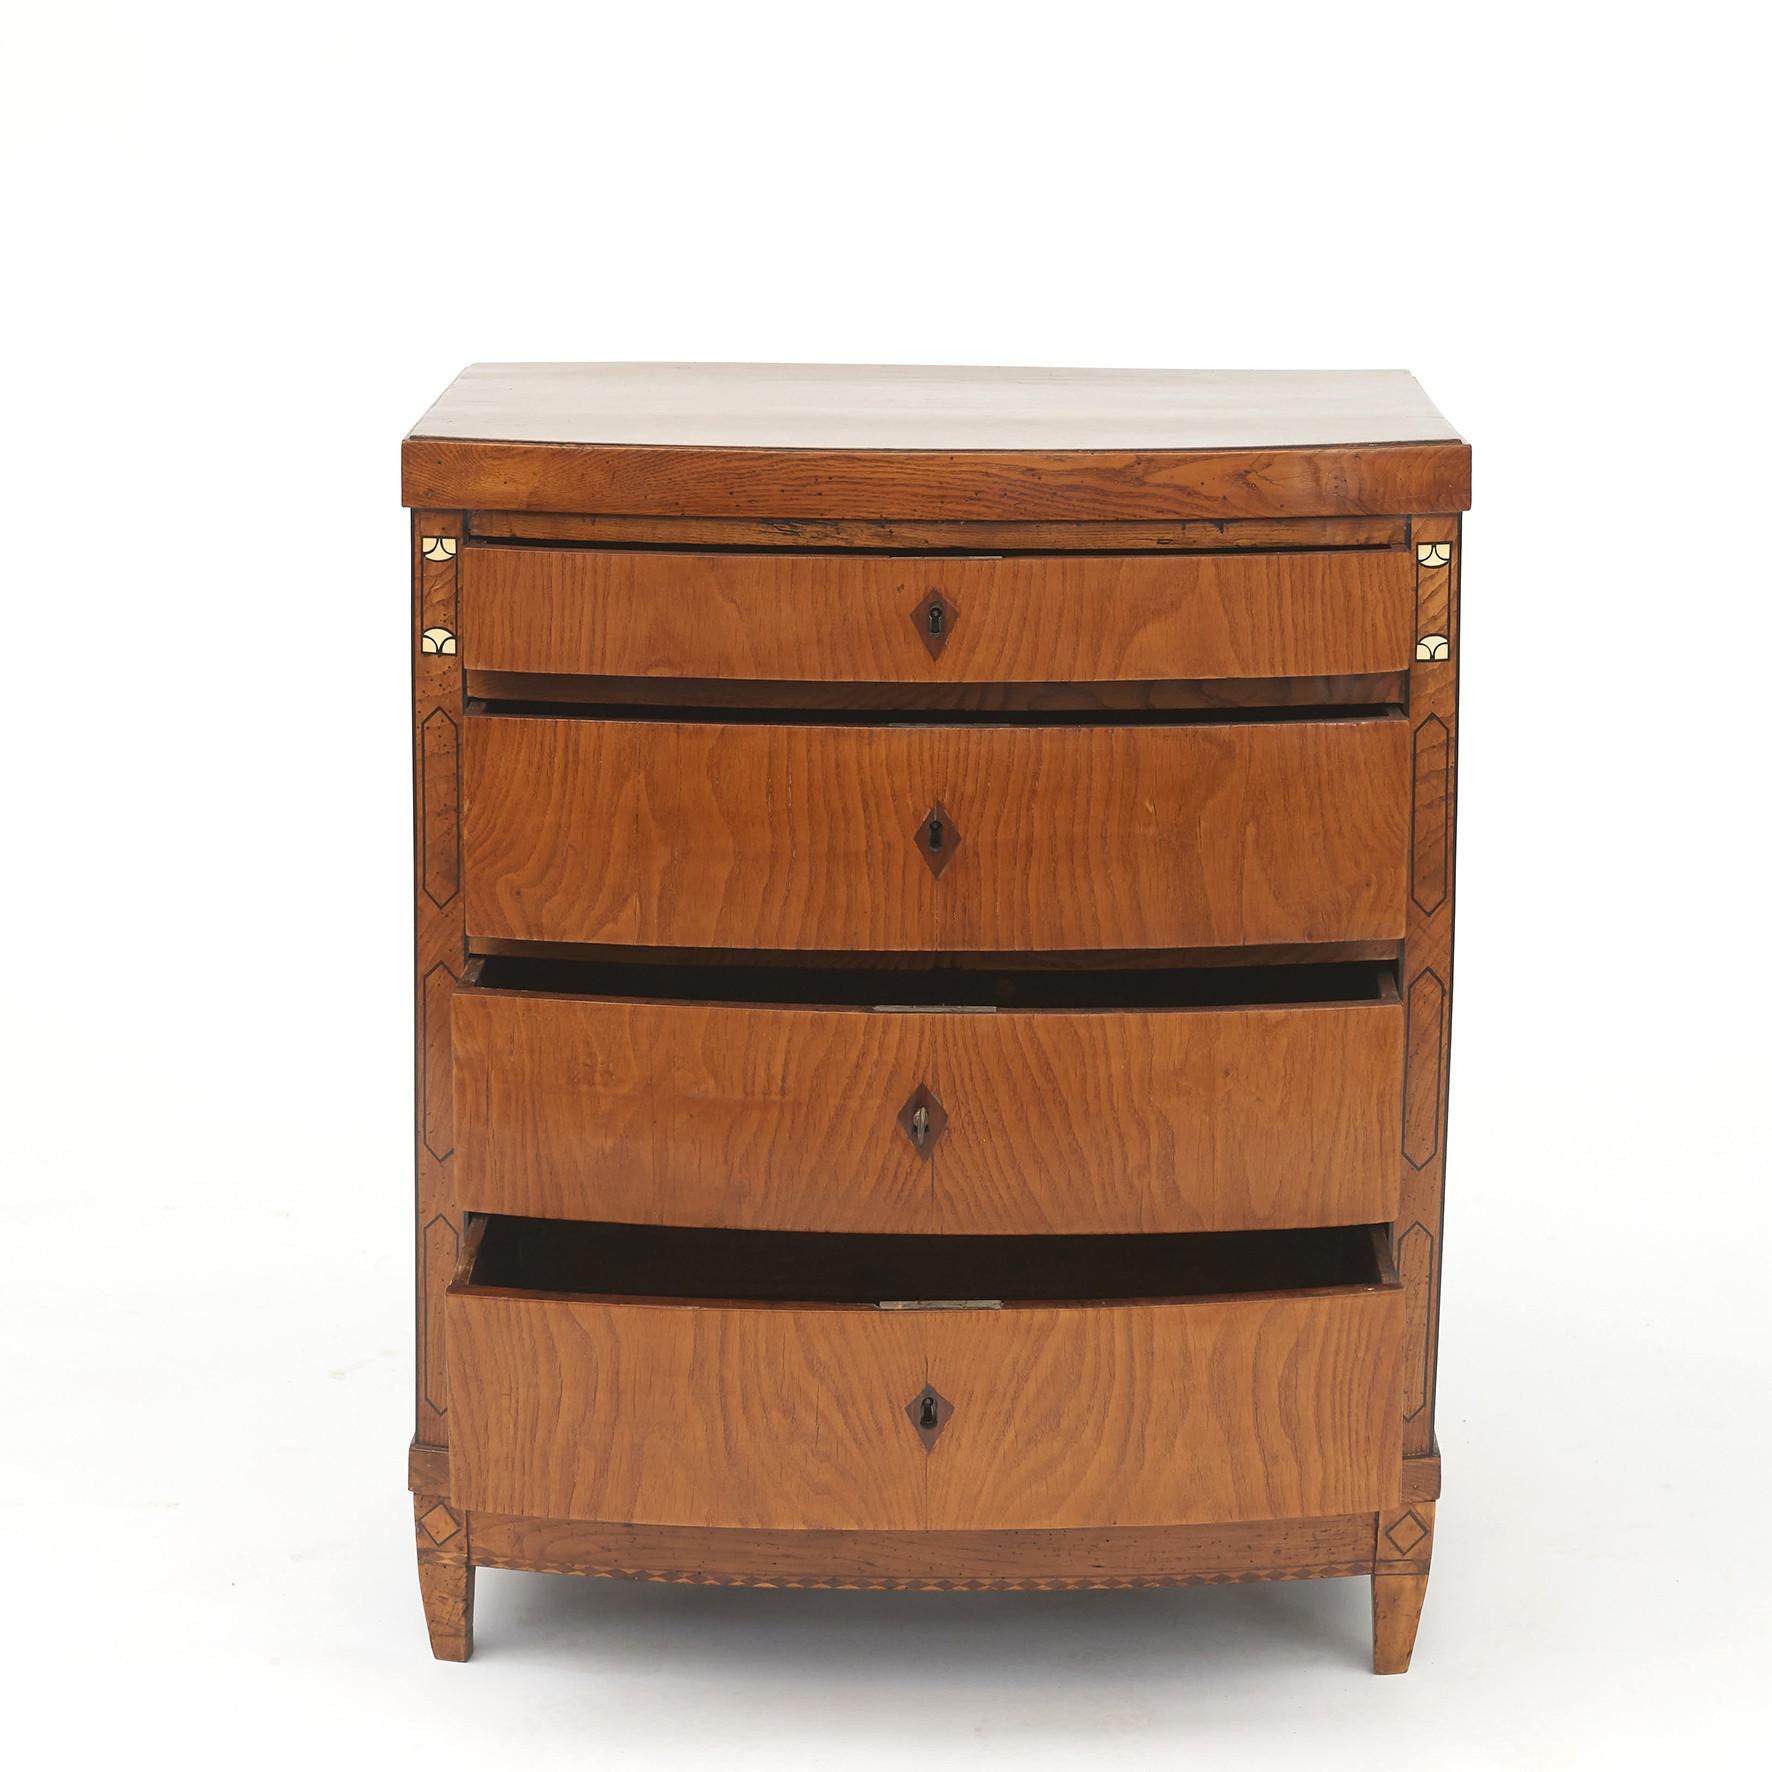 Elegant Danish Empire chest of drawers with curved front. Elm veneer with ebony marquetry decor, bone inlay flanking the top drawer.
Copenhagen, Denmark, circa 1810.